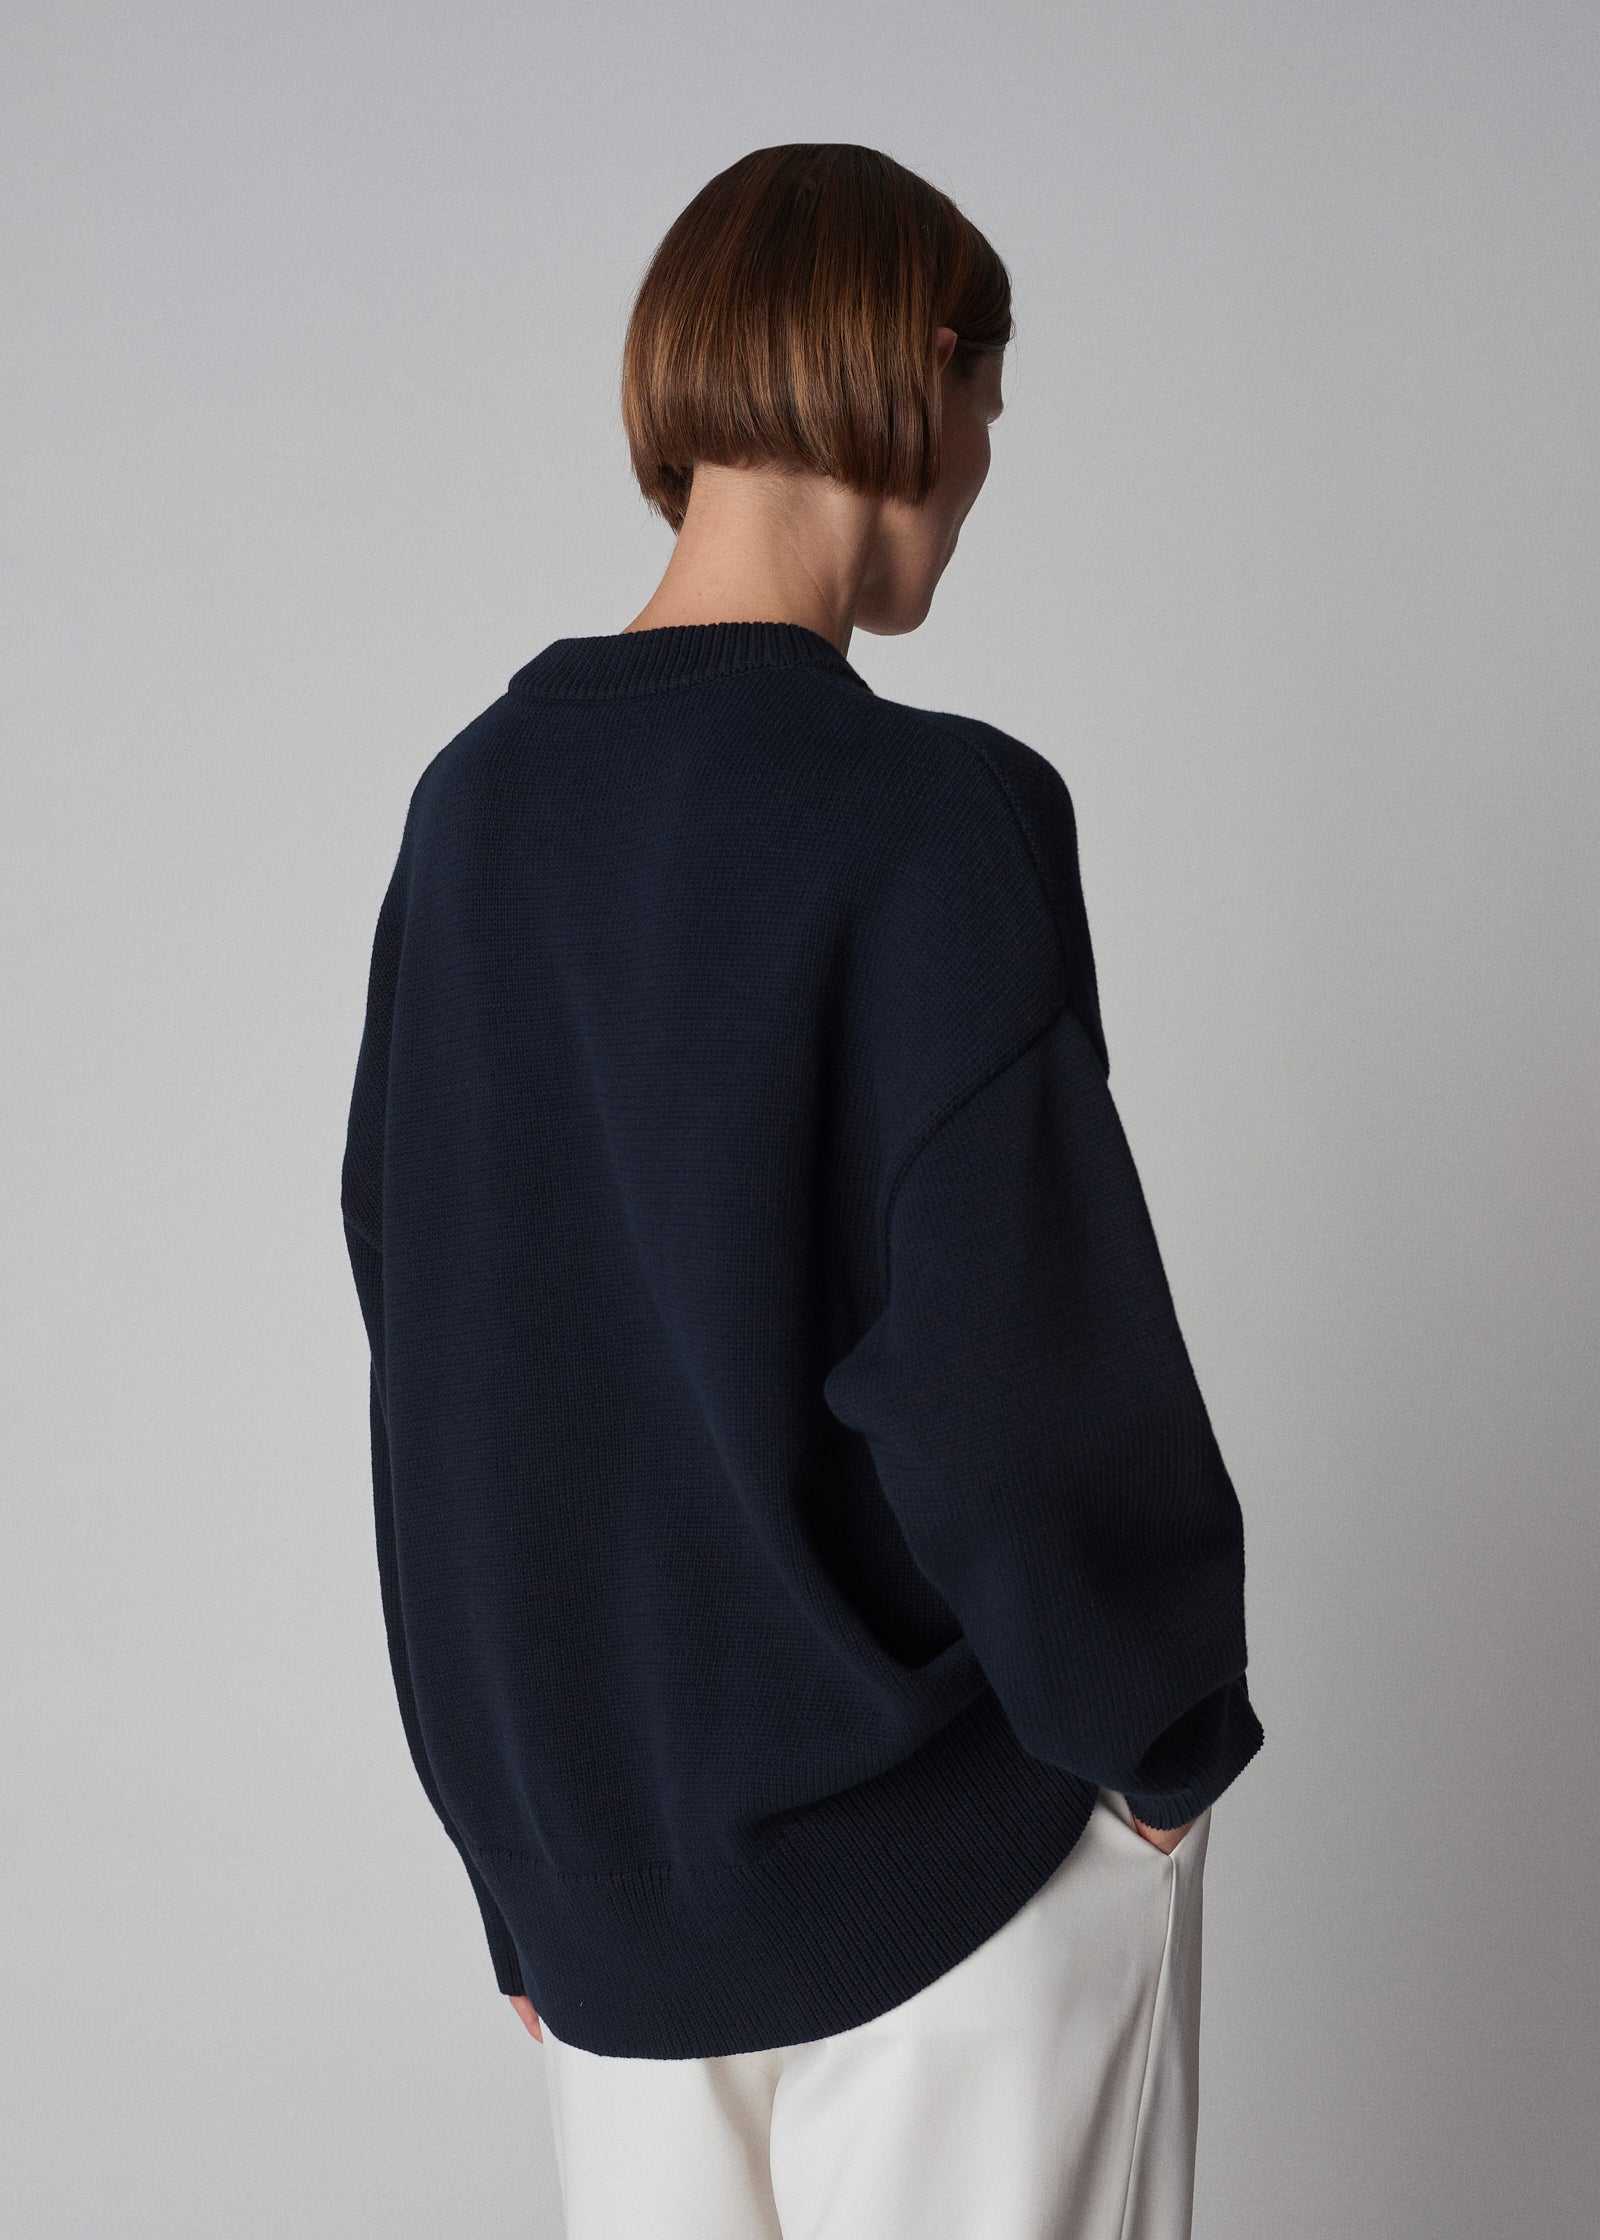 Boyfriend Crew in Cotton Knit - Navy - CO Collections